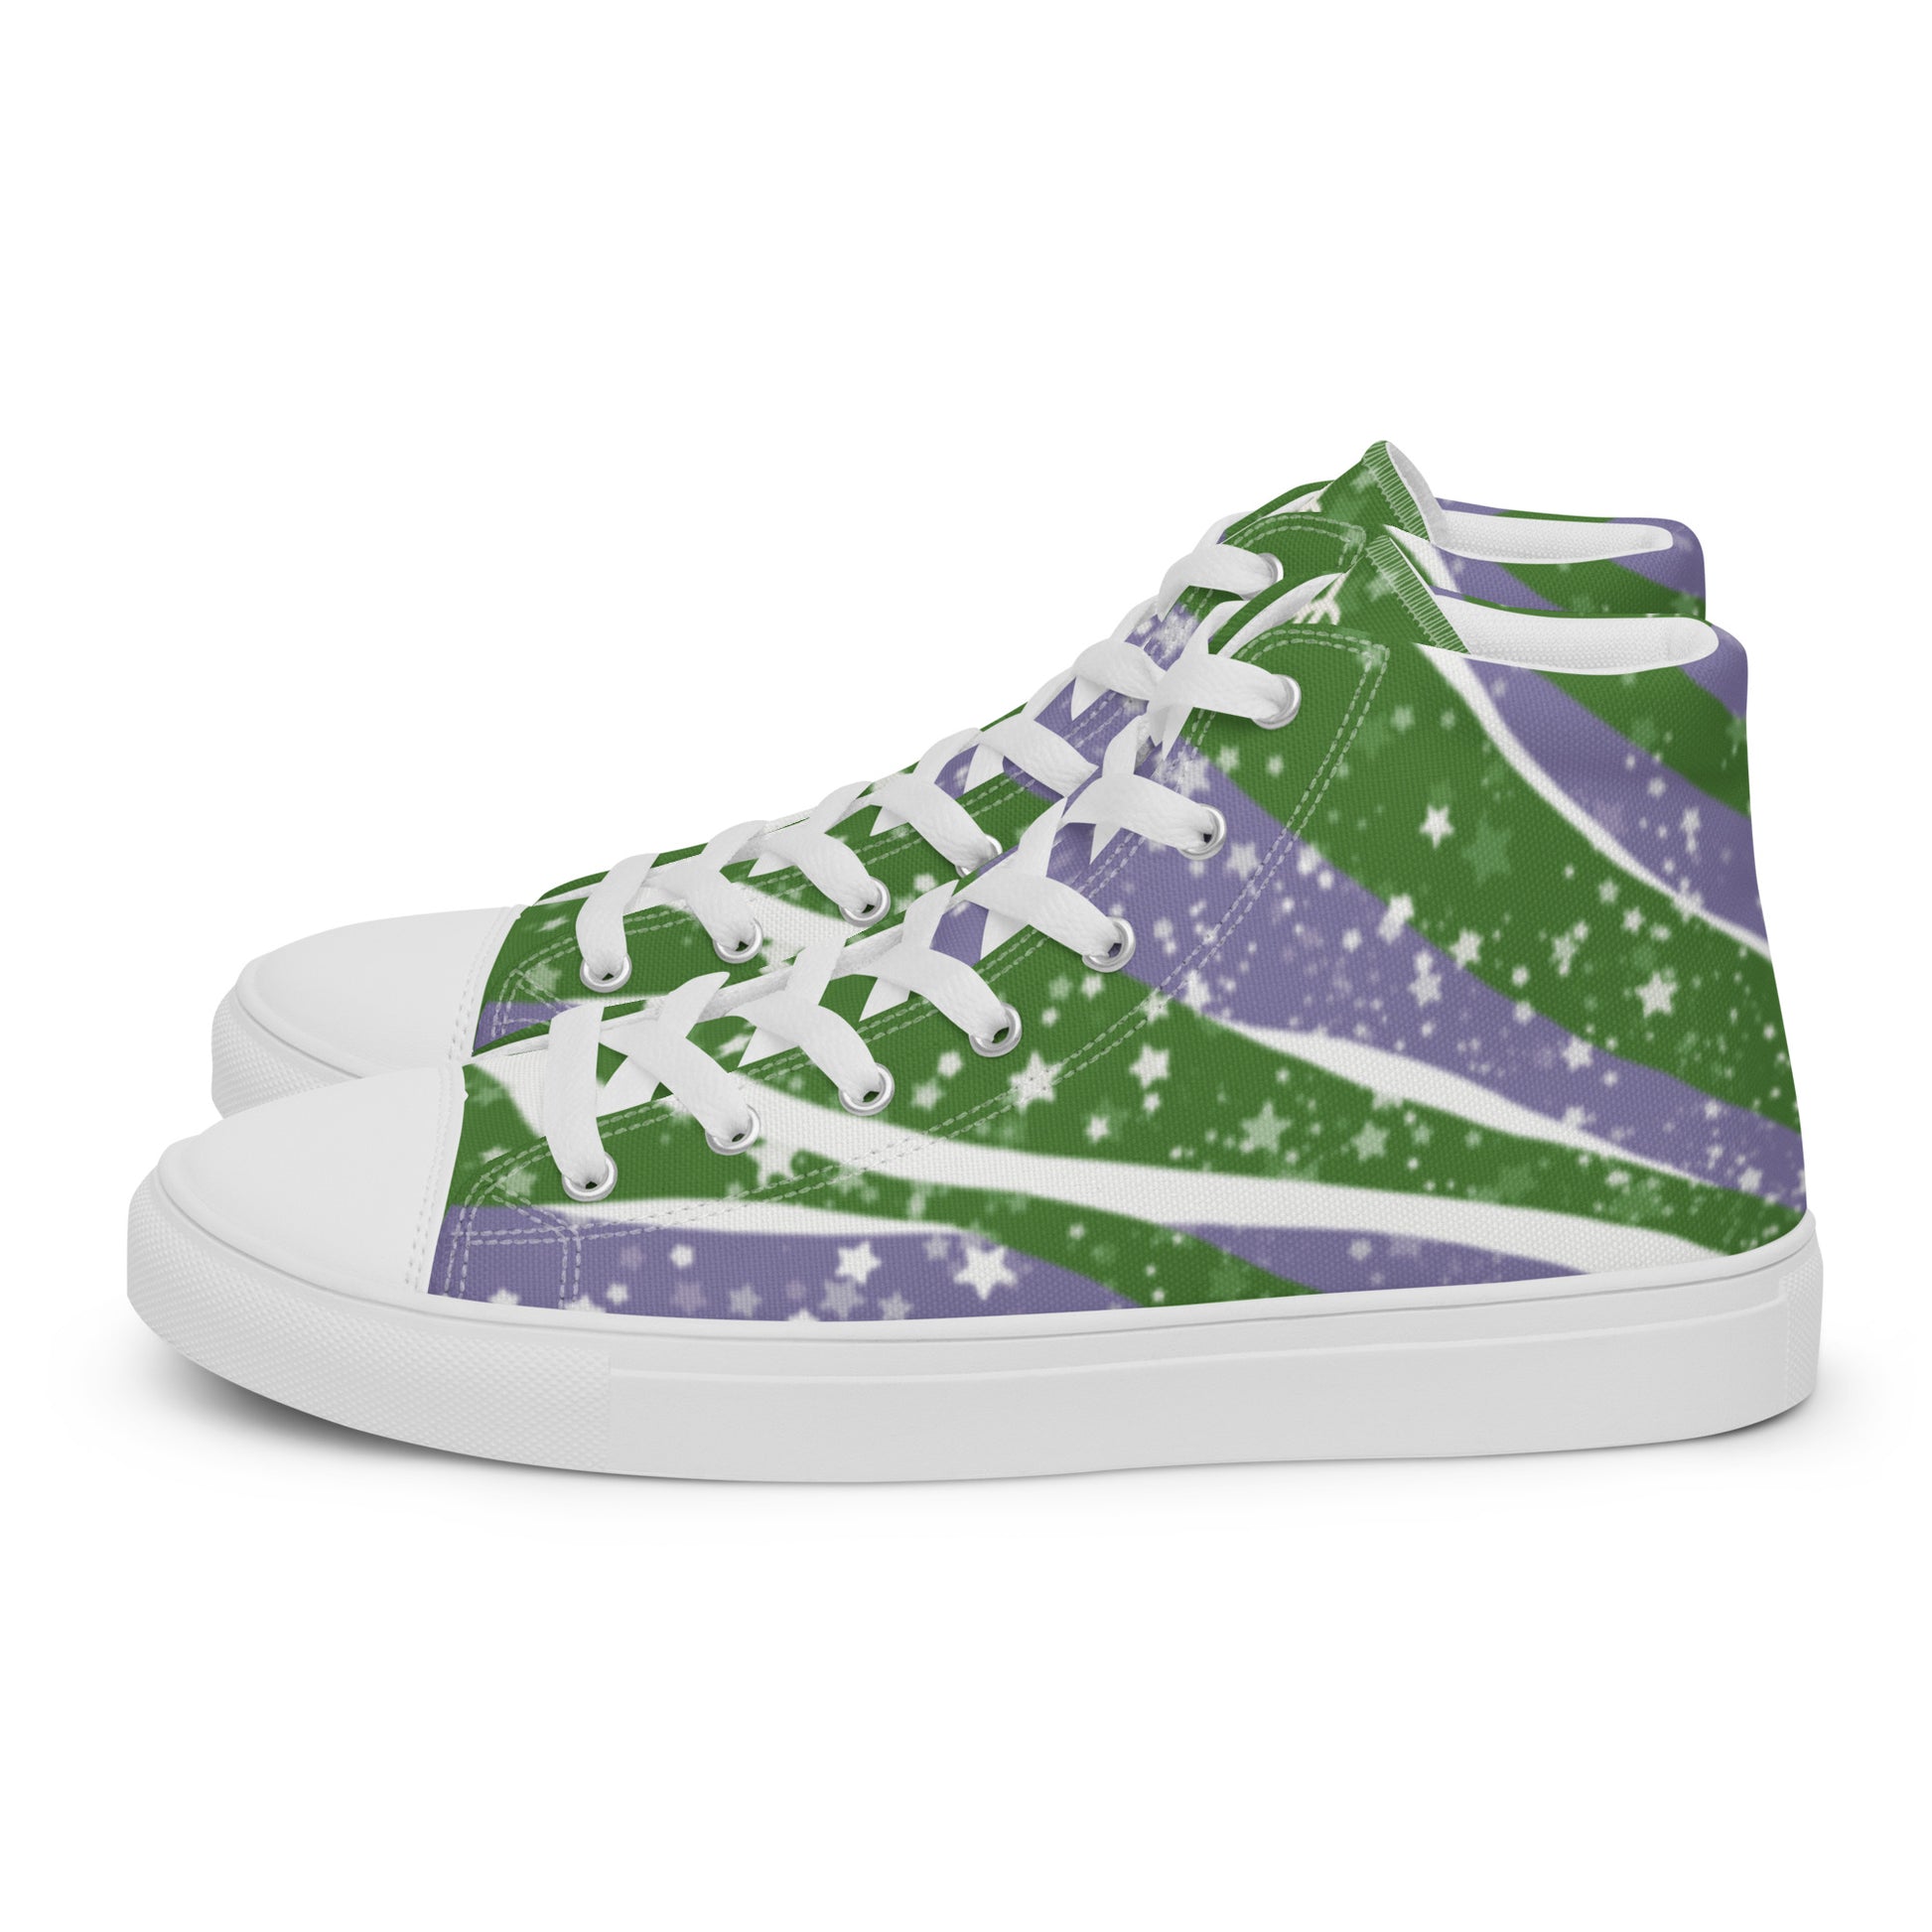 Left view: a pair of high top shoes with green, purple, and white ribbons that get larger from heel to laces, white stars, and the Aras Sivad logo on the tongue.